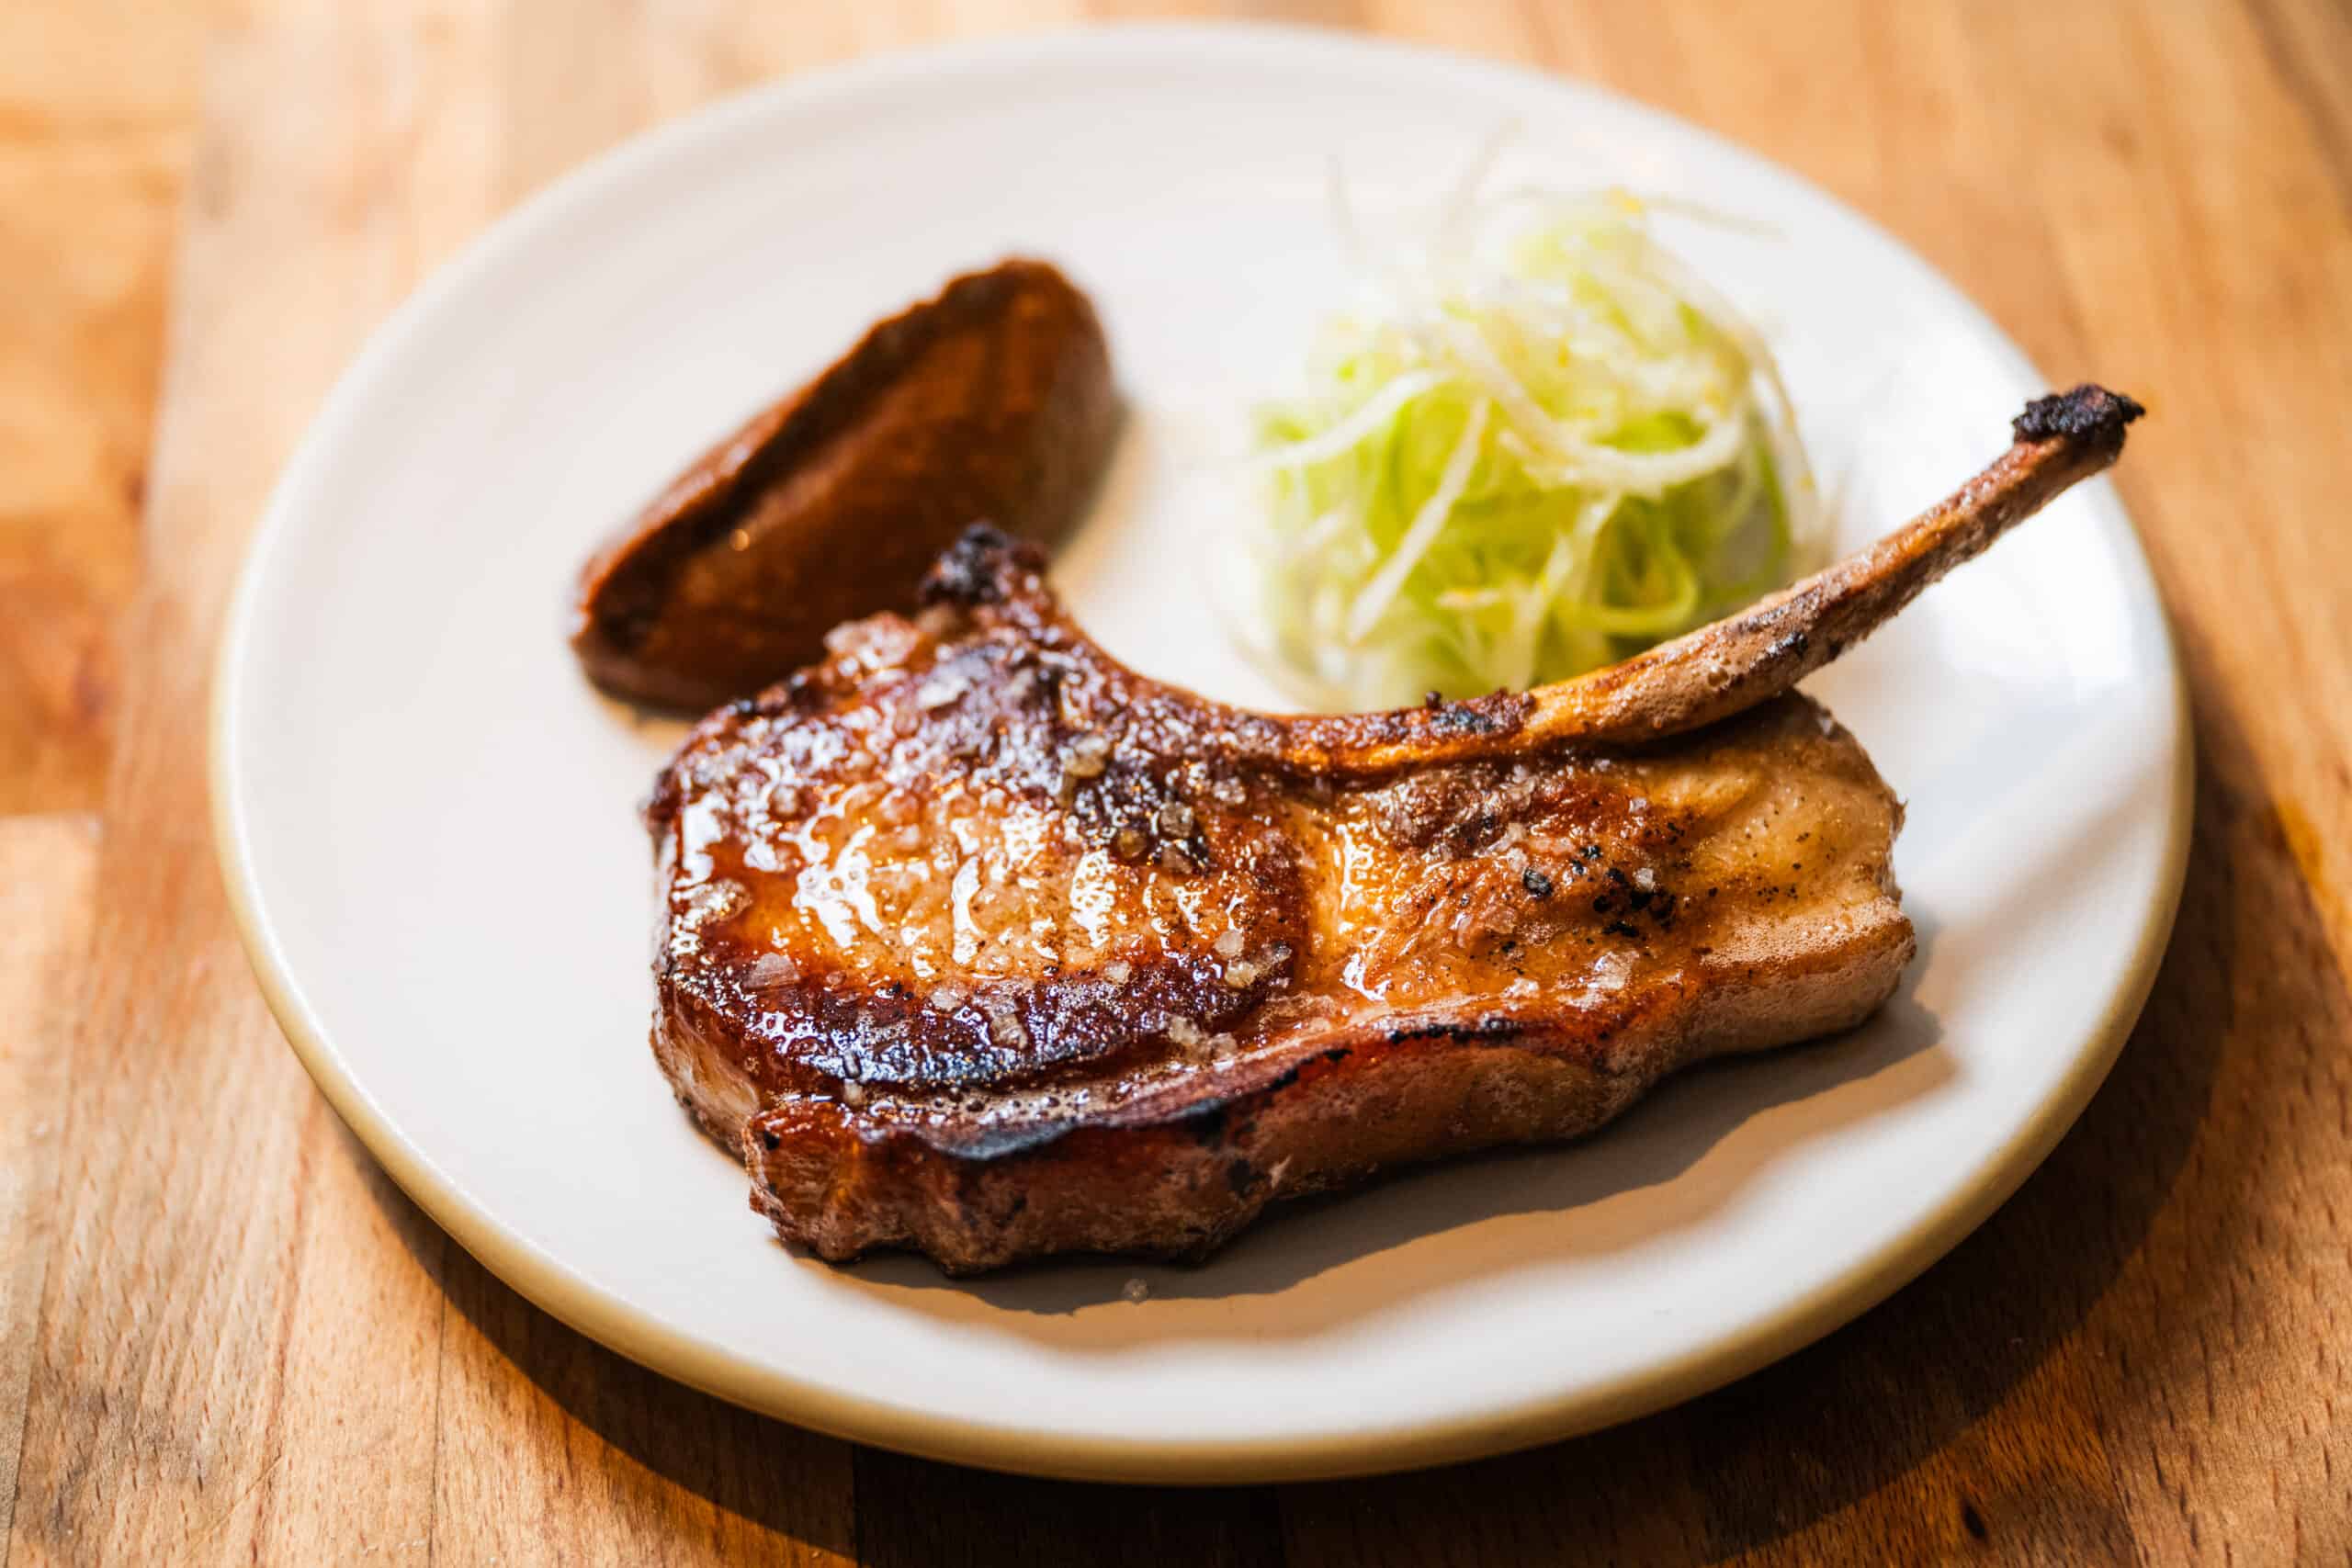 Ana Castro's pork chop on a plate garnished with slaw and prune mole